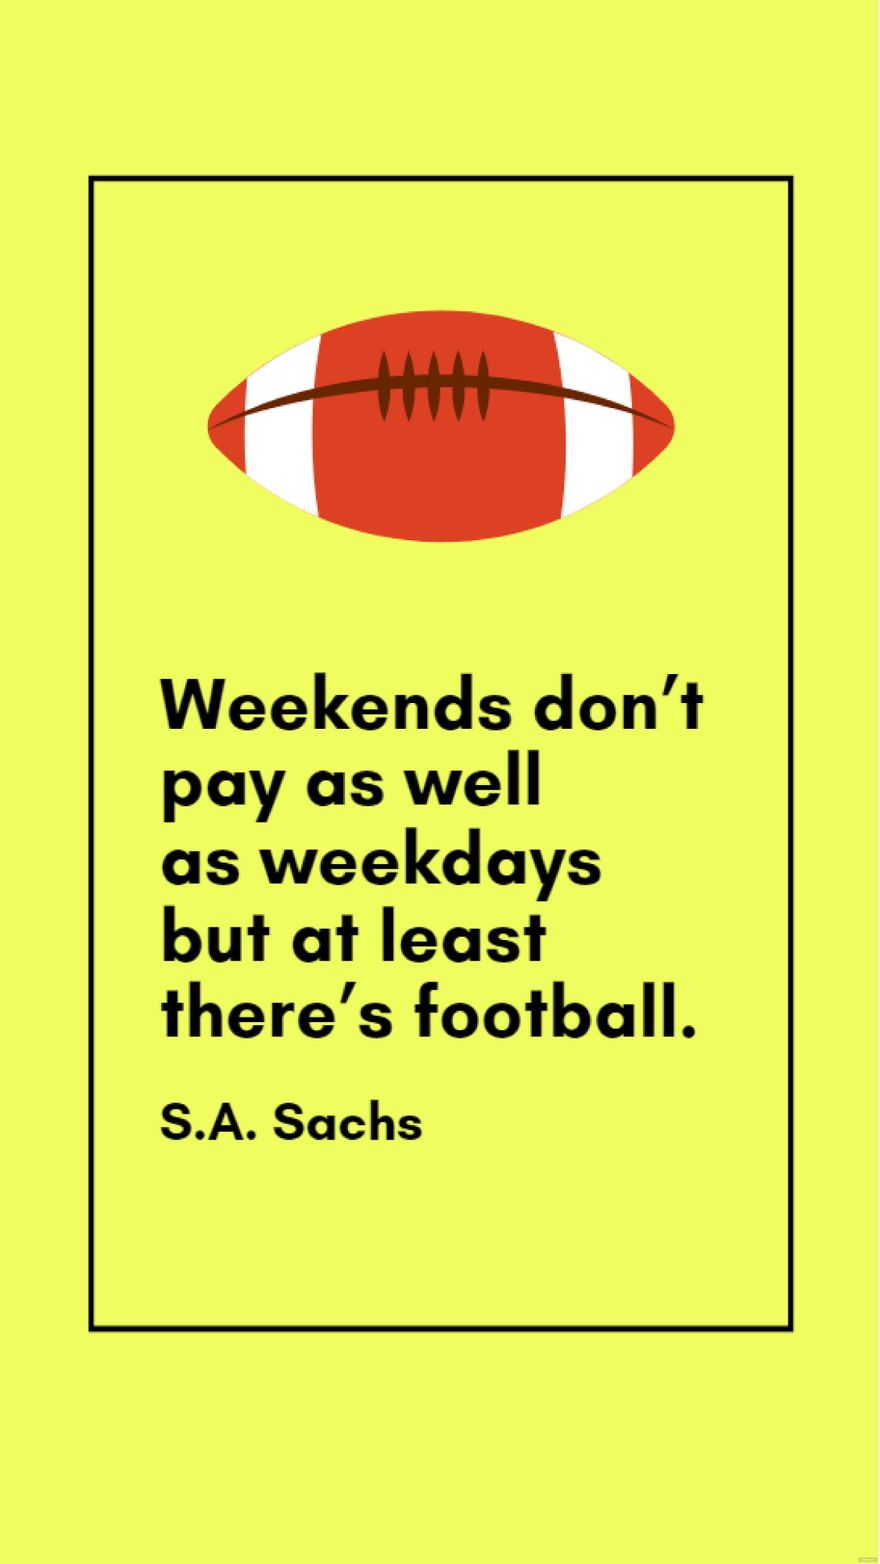 Free S.A. Sachs - Weekends don’t pay as well as weekdays but at least there’s football. in JPG